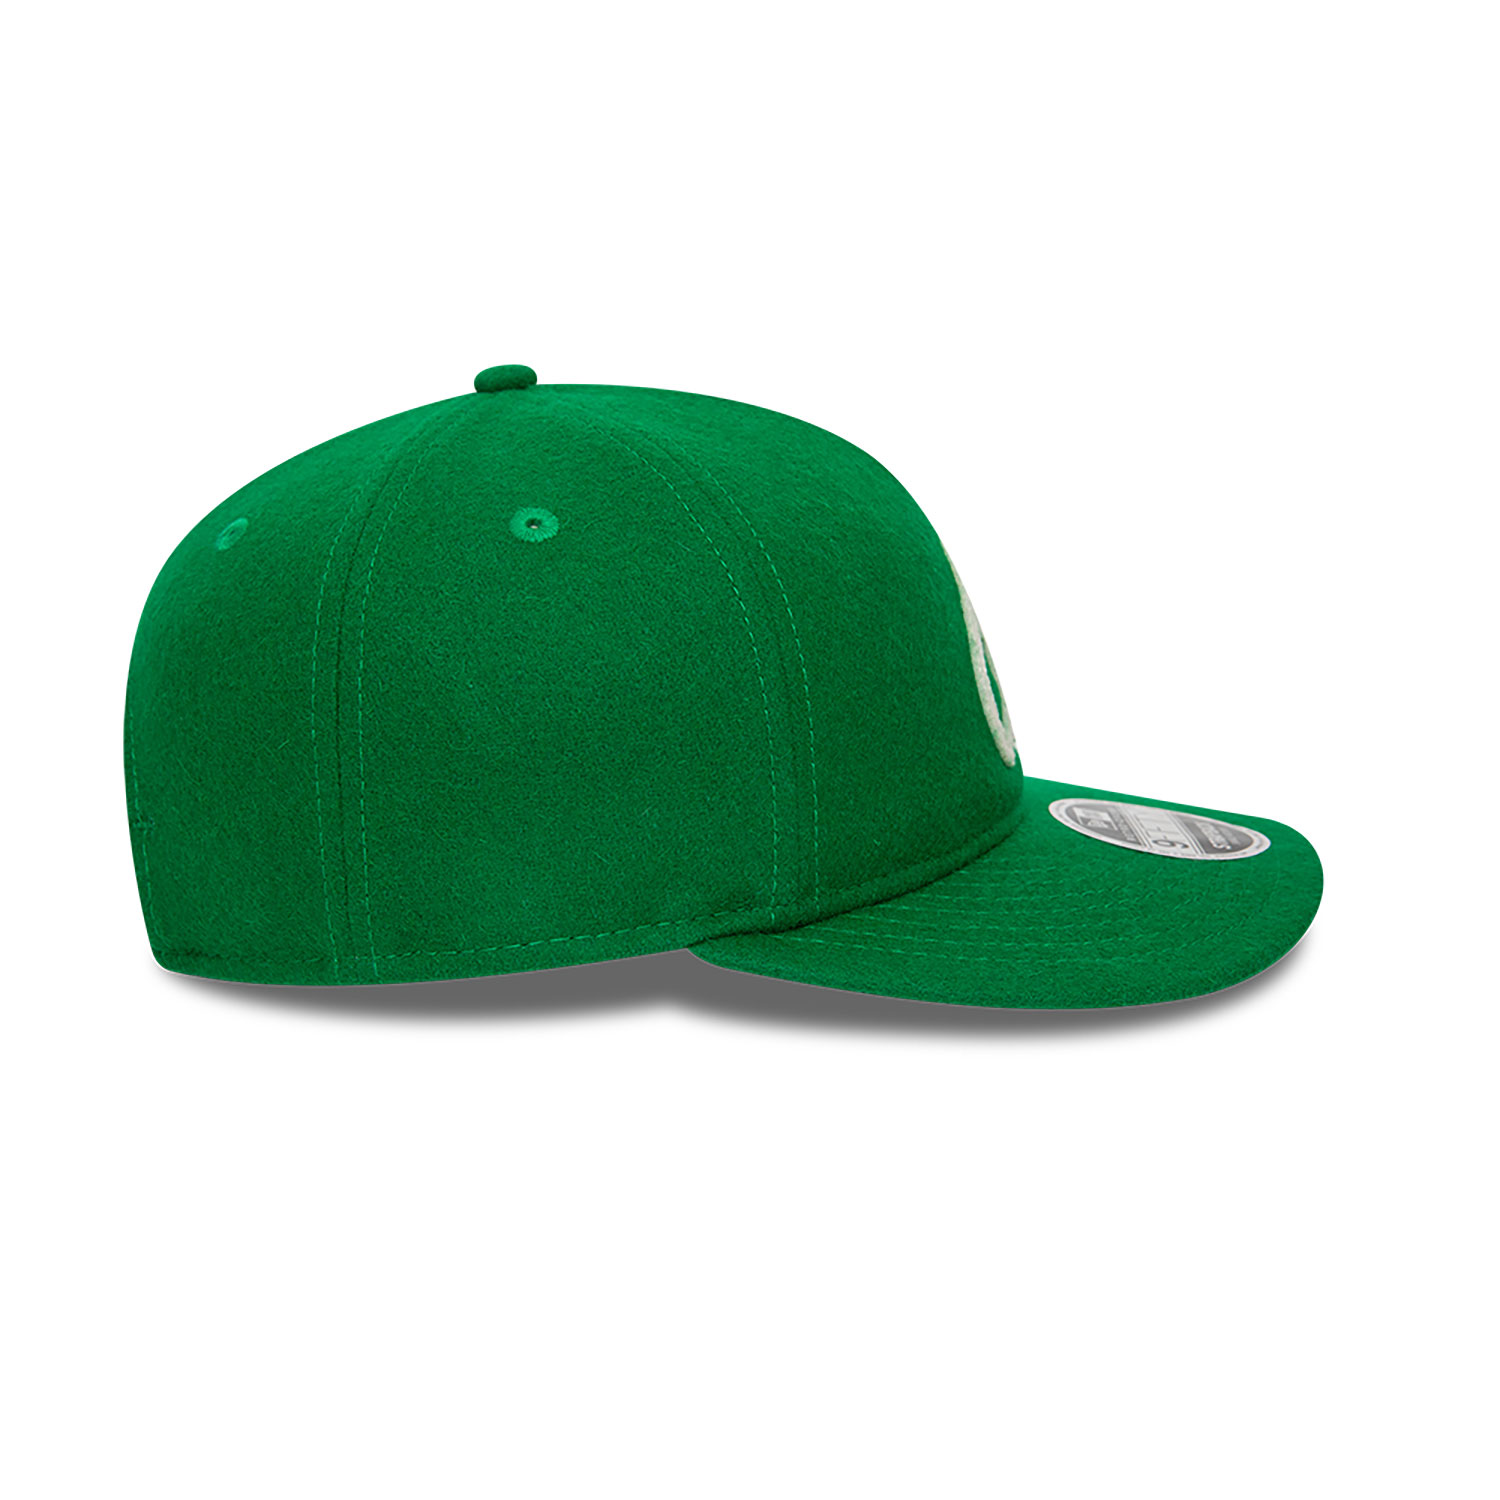 Baltimore Orioles MLB Cooperstown Green Retrocrown 9FIFTY Strapback Cap